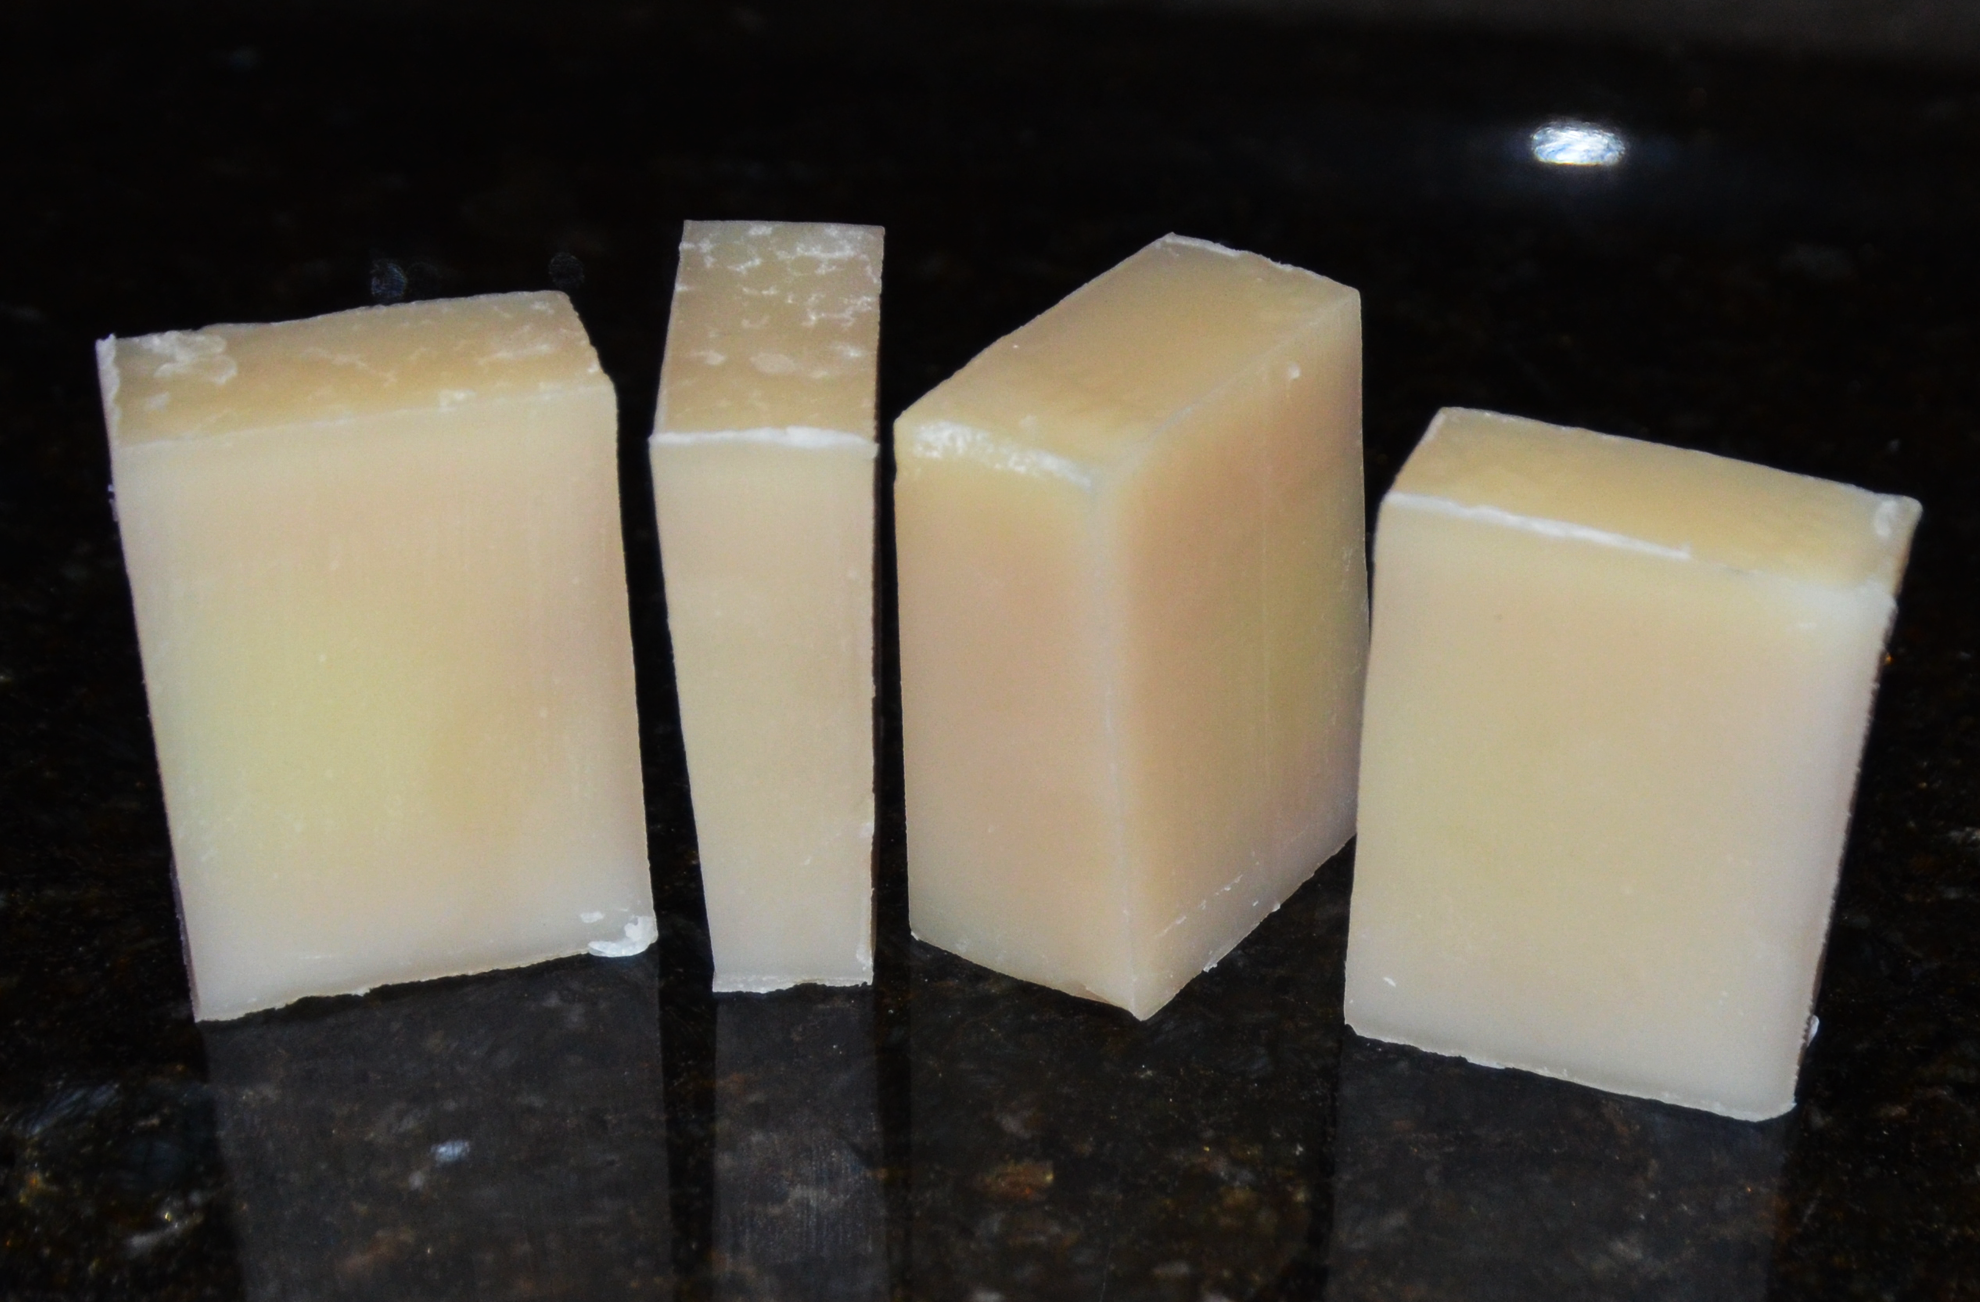 Using the Natural Soap